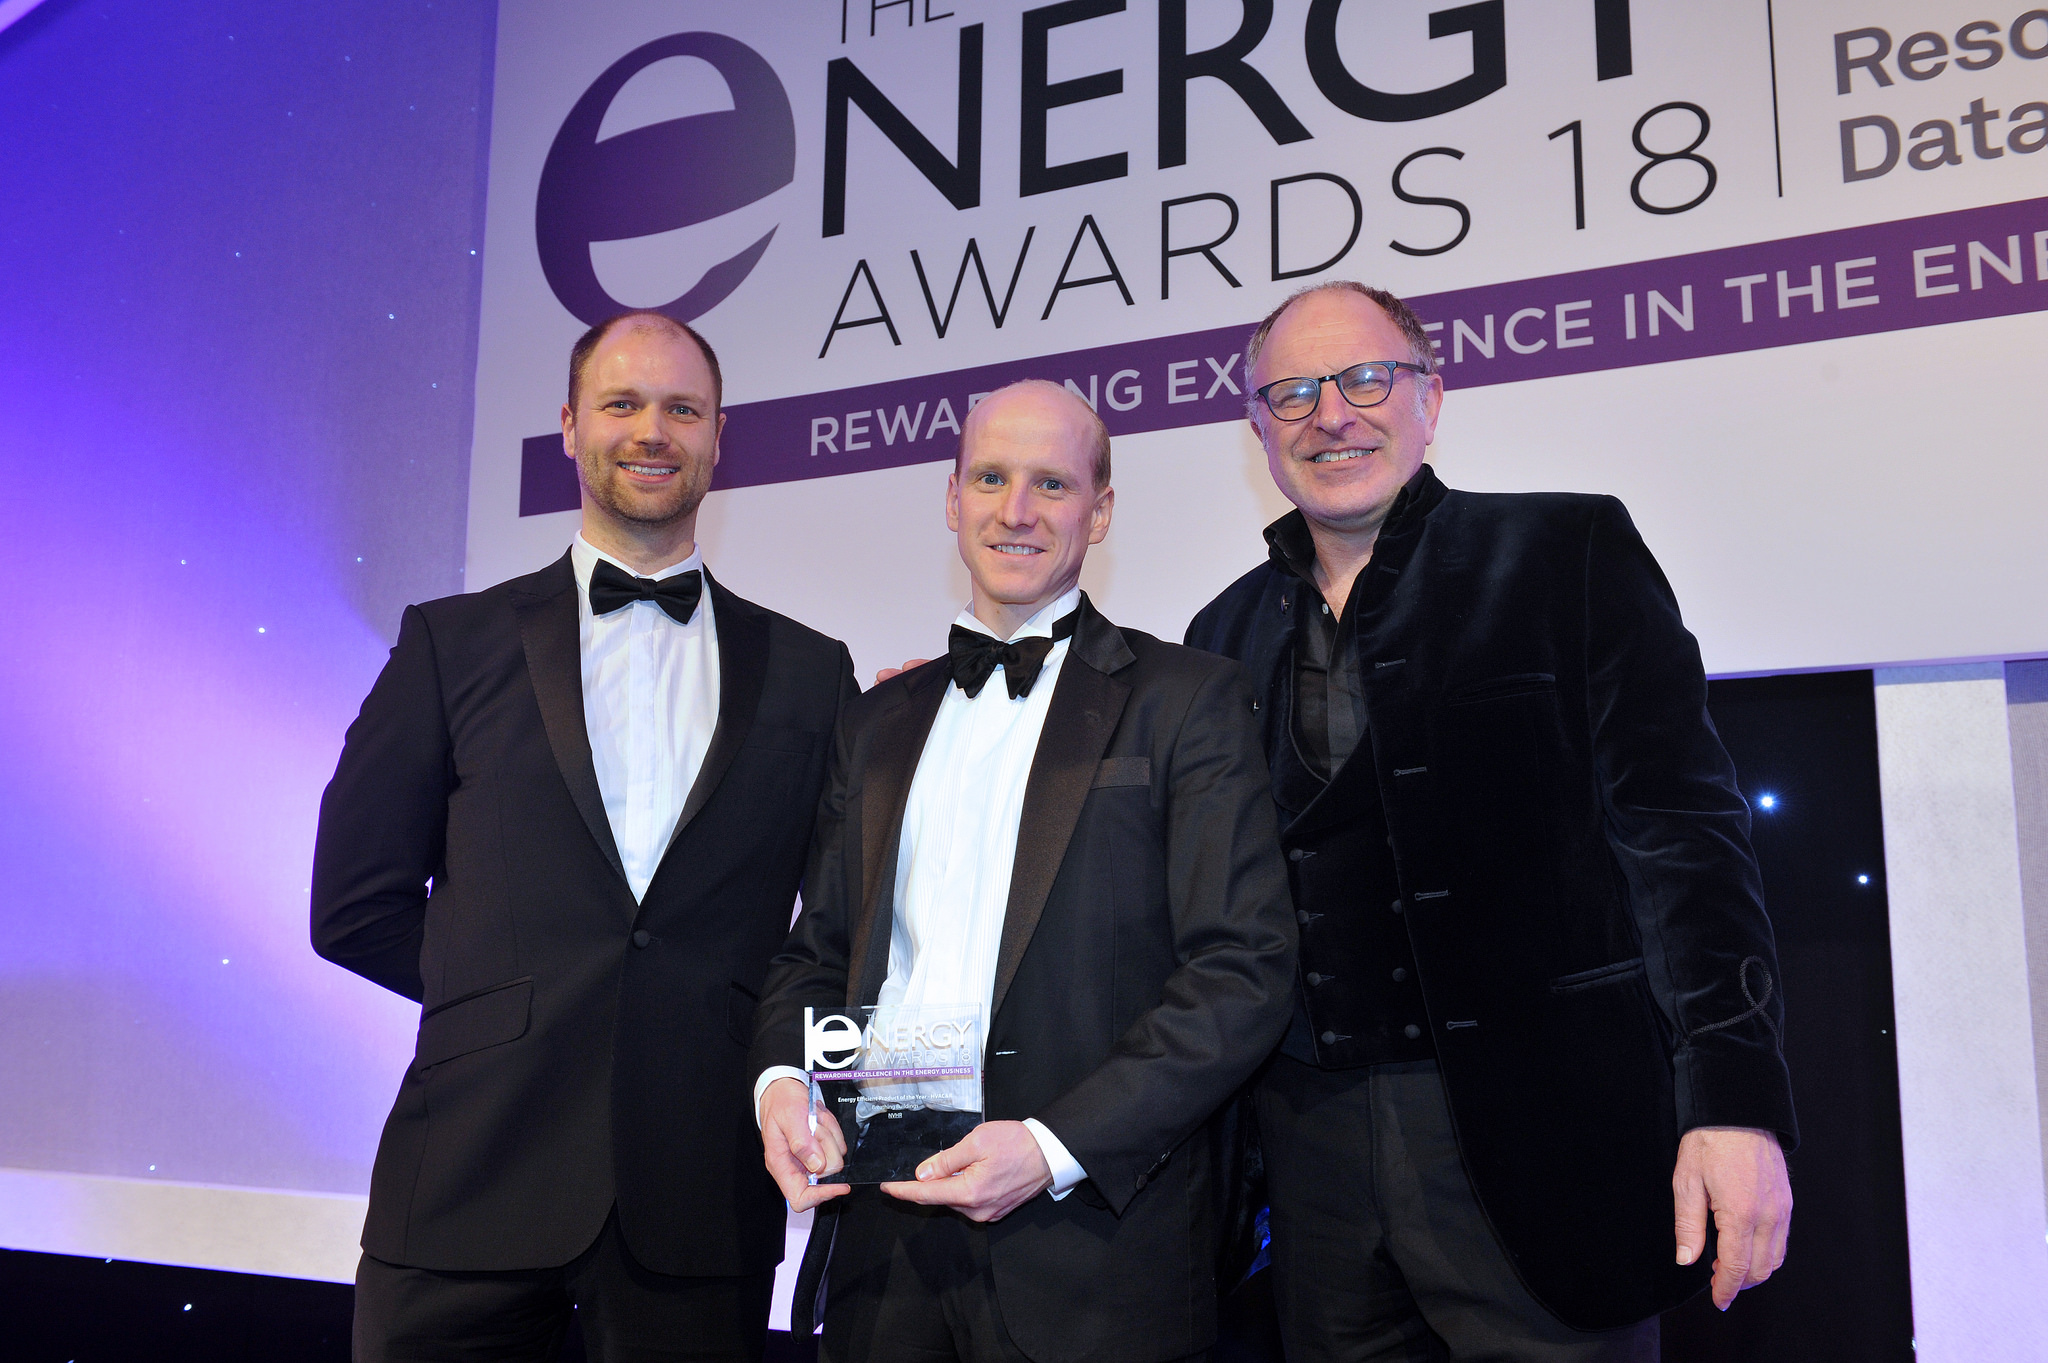 Dr Owen Connick - Breathing Buildings - Energy Awards